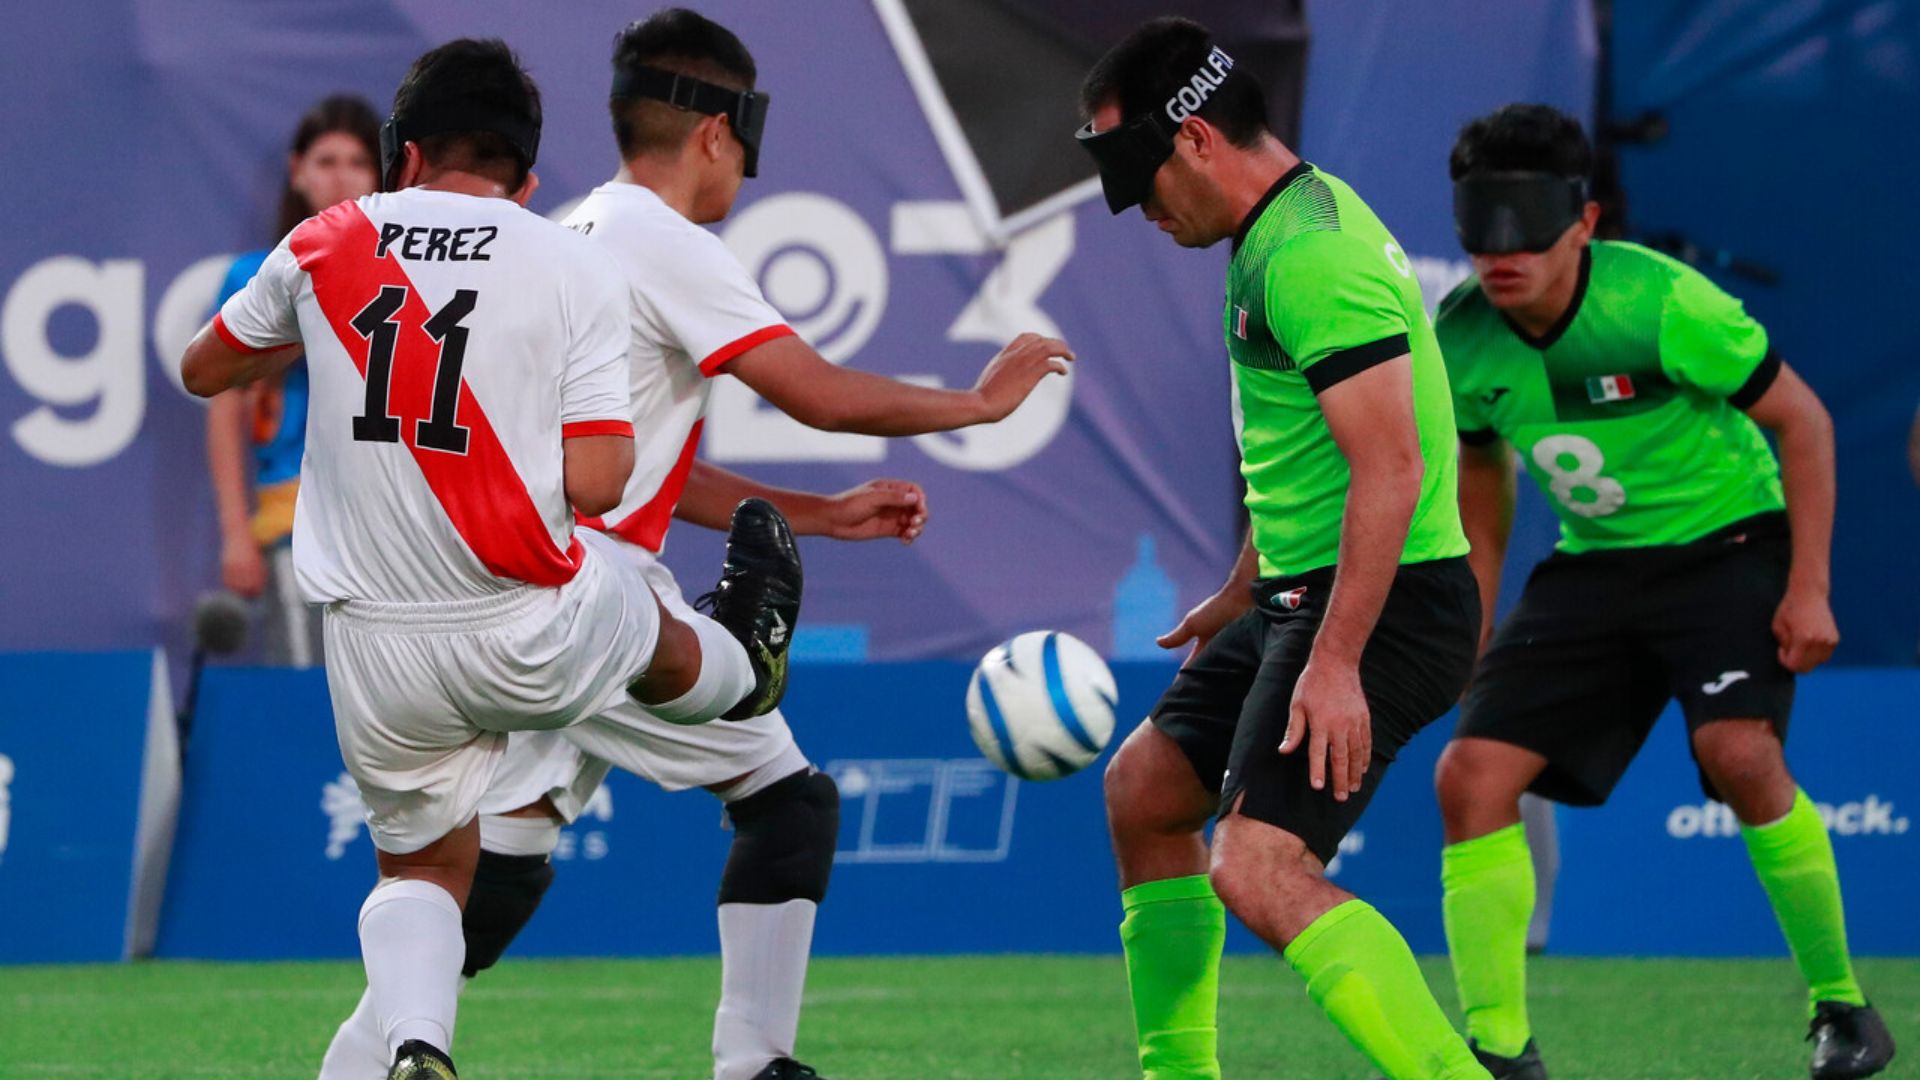 Blind Football: Peru, Mexico Share Points in Exciting Match